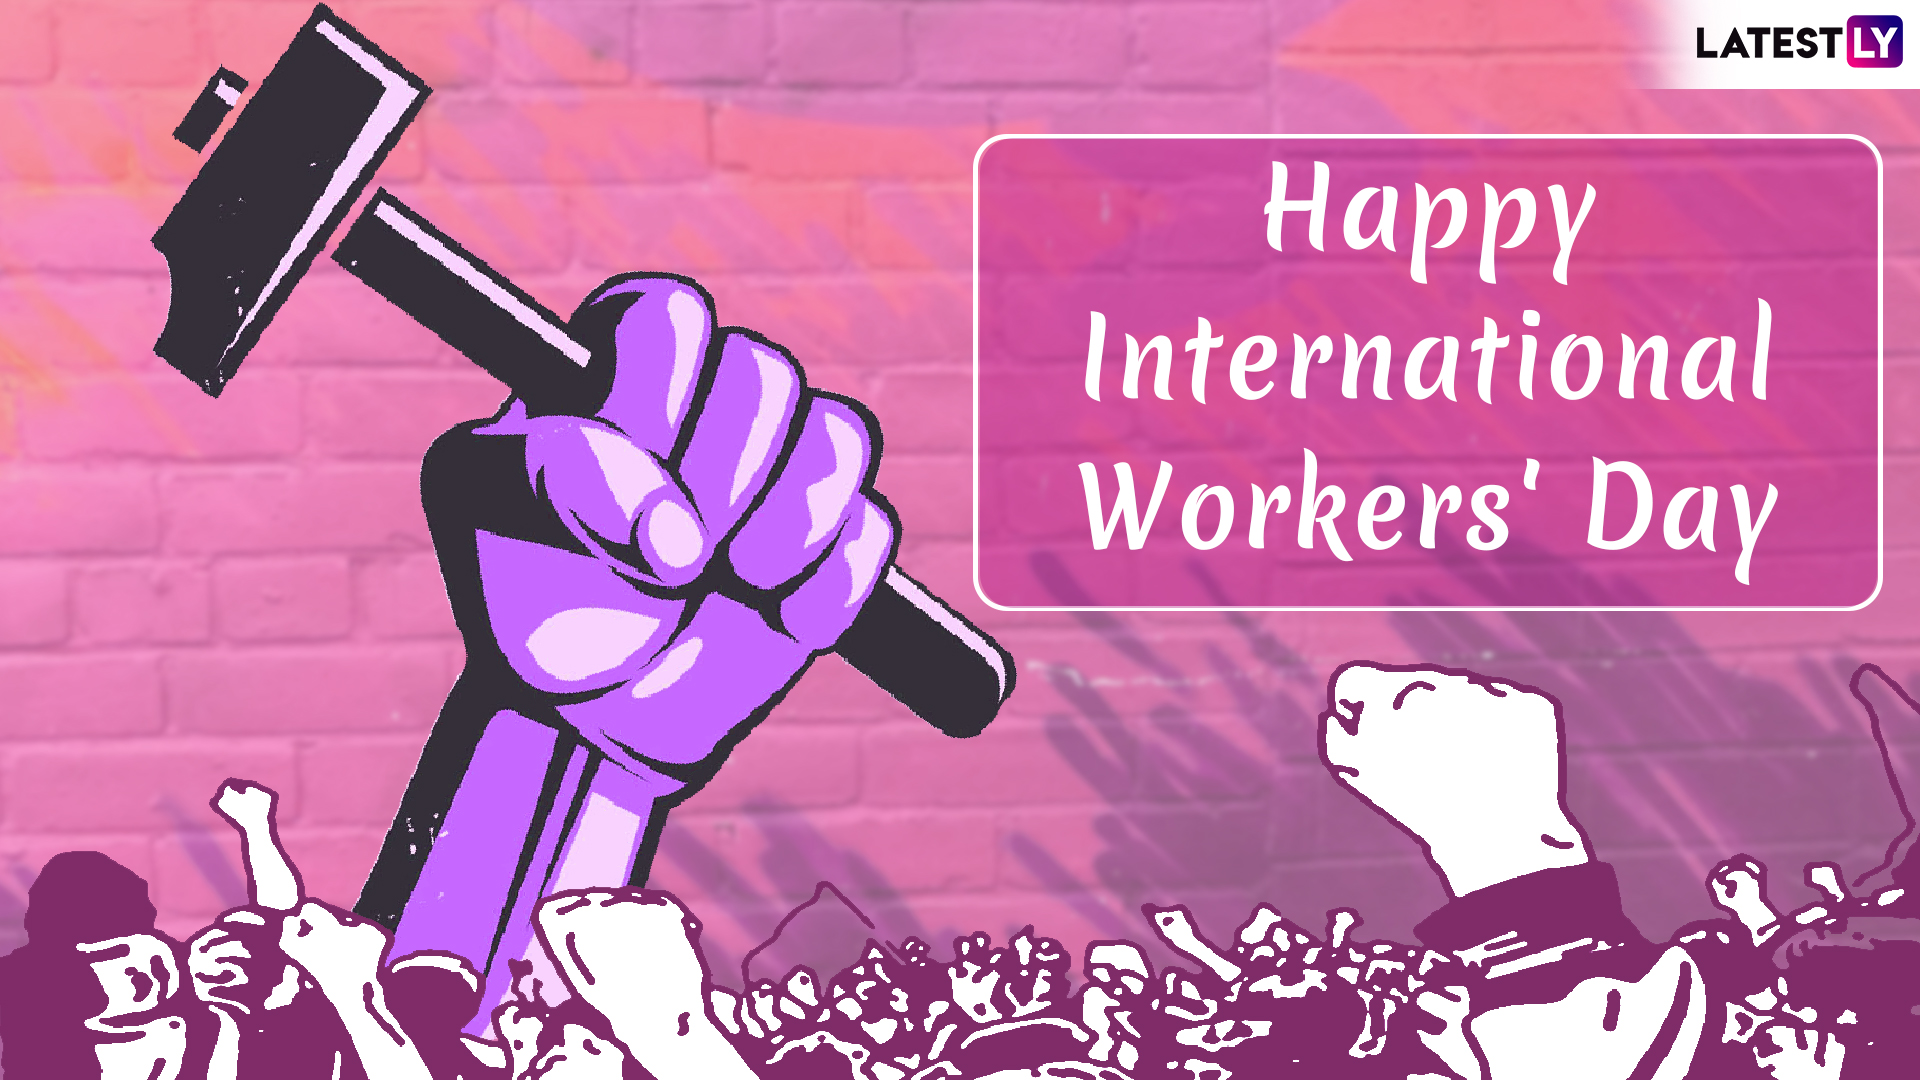 International Workers Day 2022 Wishes And Images Whatsapp Stickers Facebook Status 5917